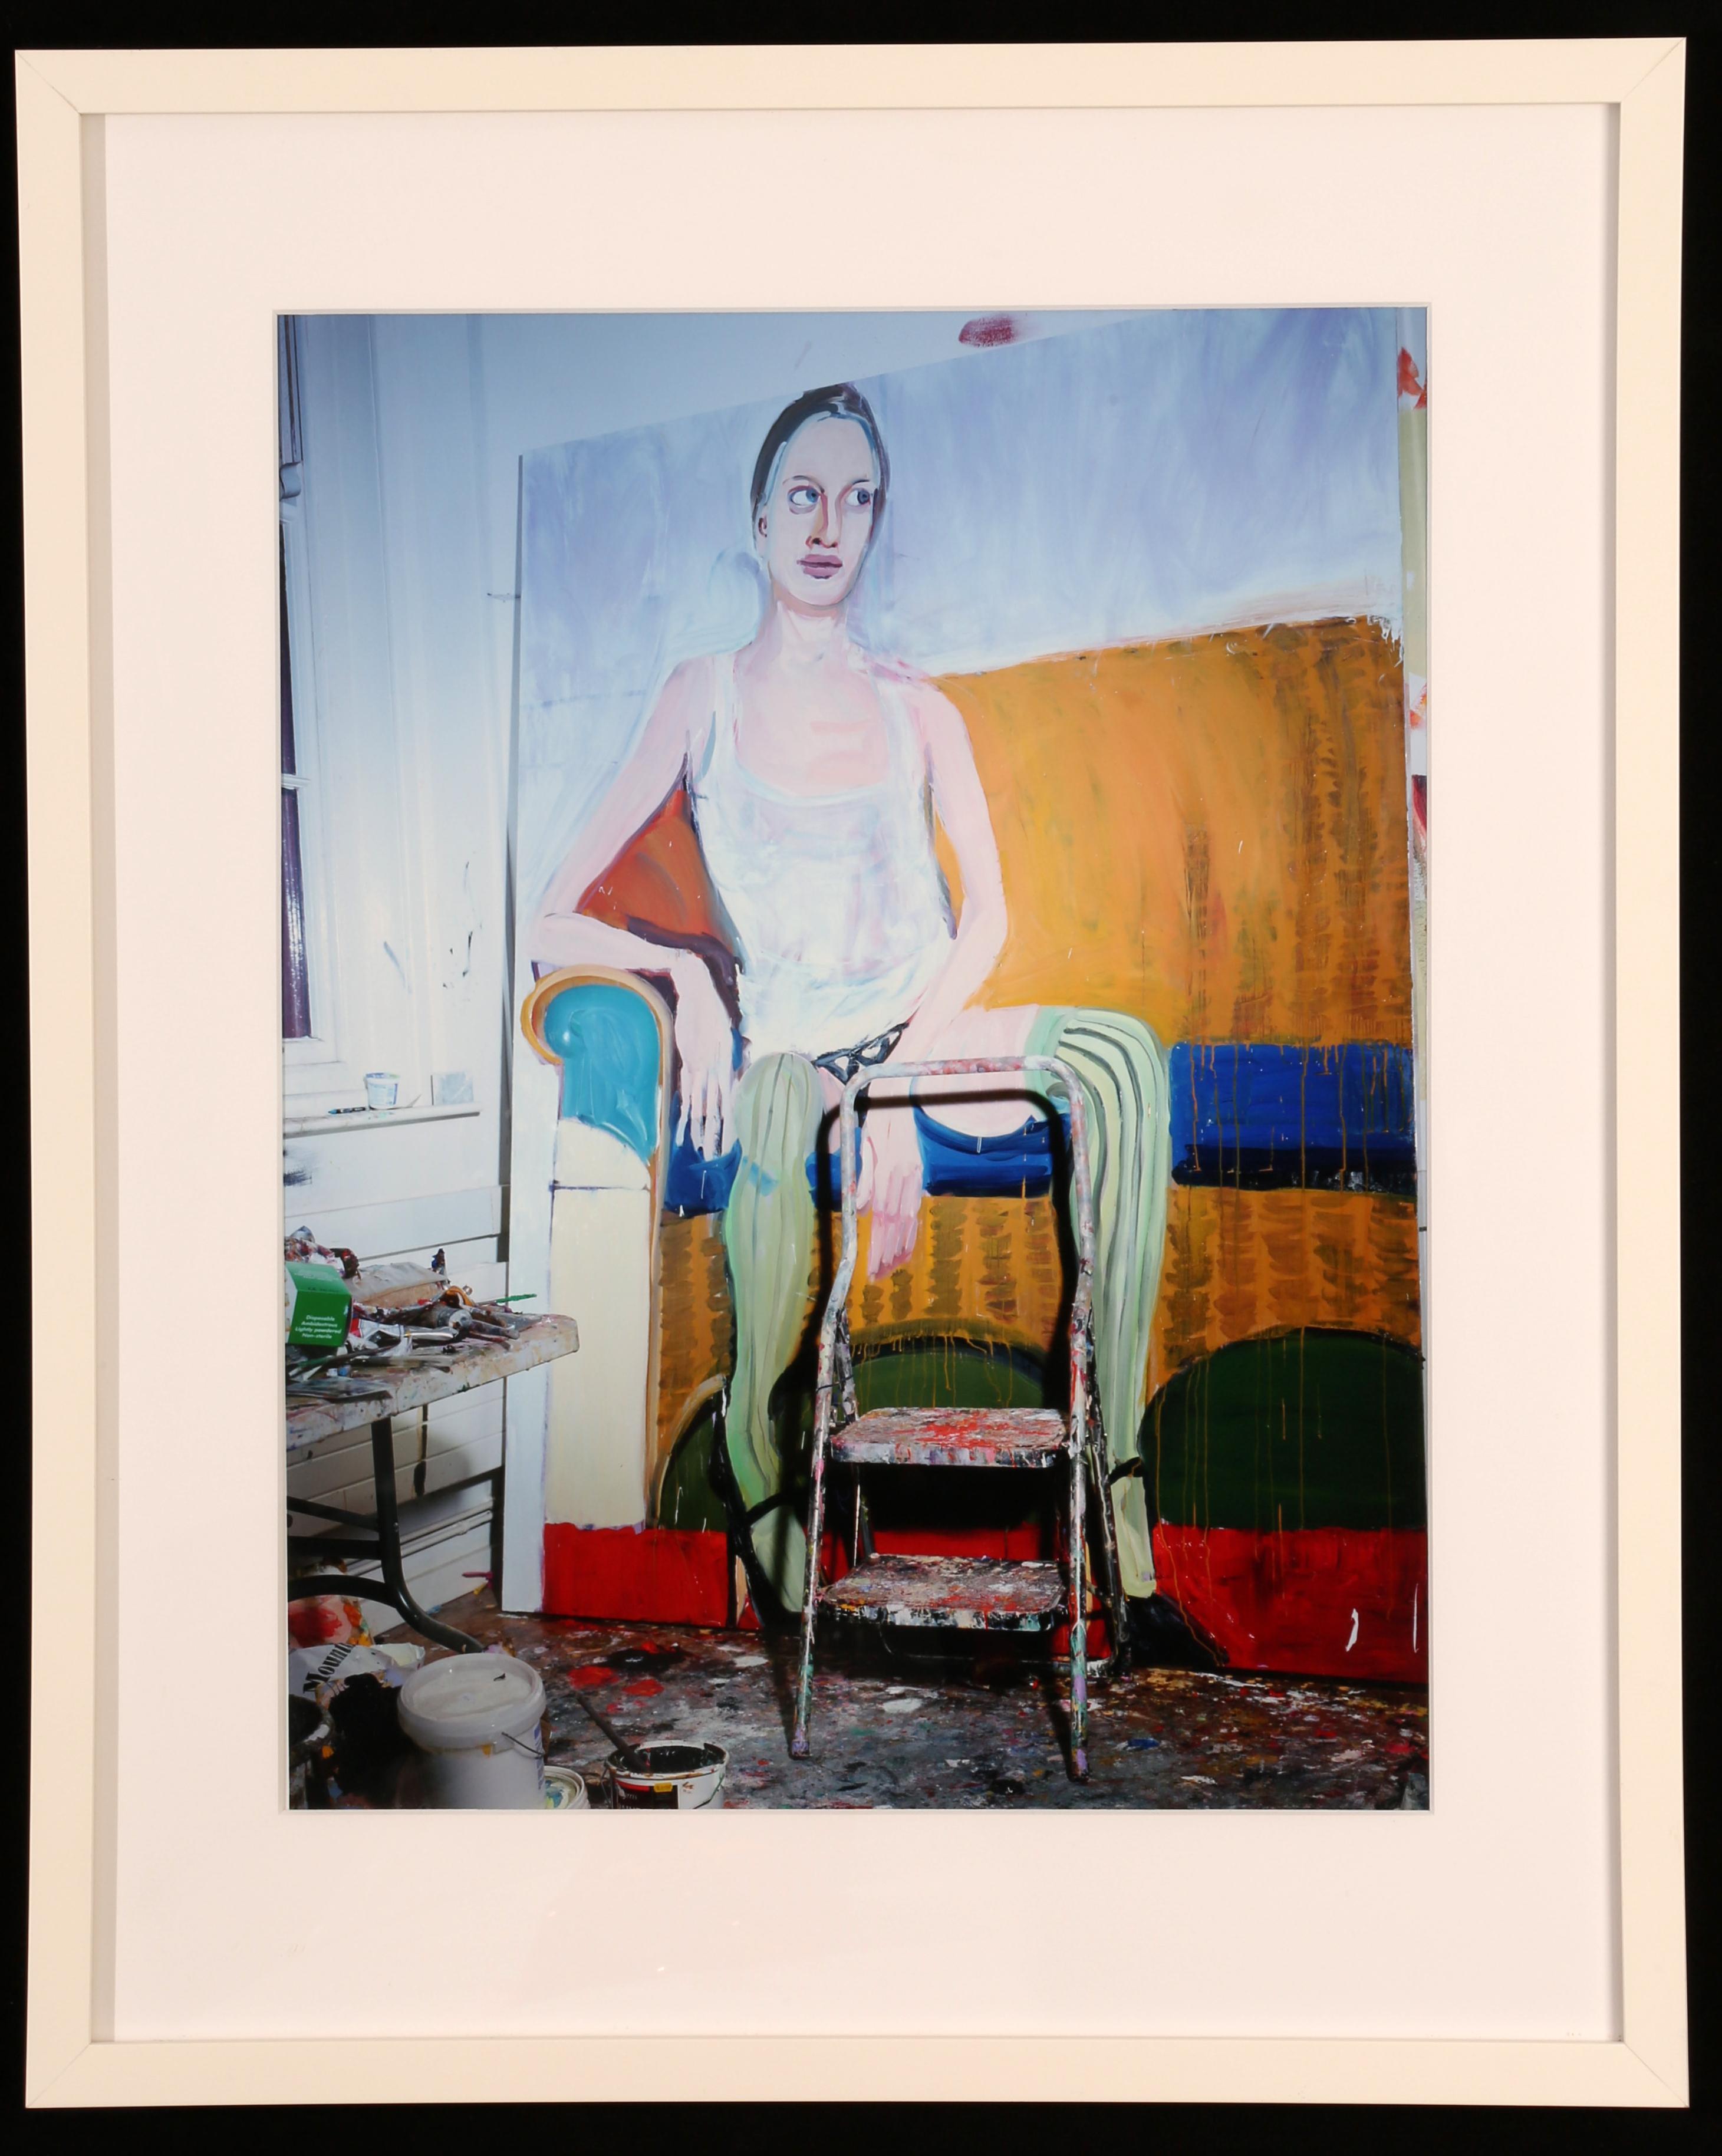 Miles Aldridge
Kristen, Painting by Chantal Joffe (from Kristen series), 2010
Lambda print on photographic wove paper
Framed Dimensions: 23.62 x 19.69 x 1.18 inches  (60 x 50 x 3 cm)
Edition of 60